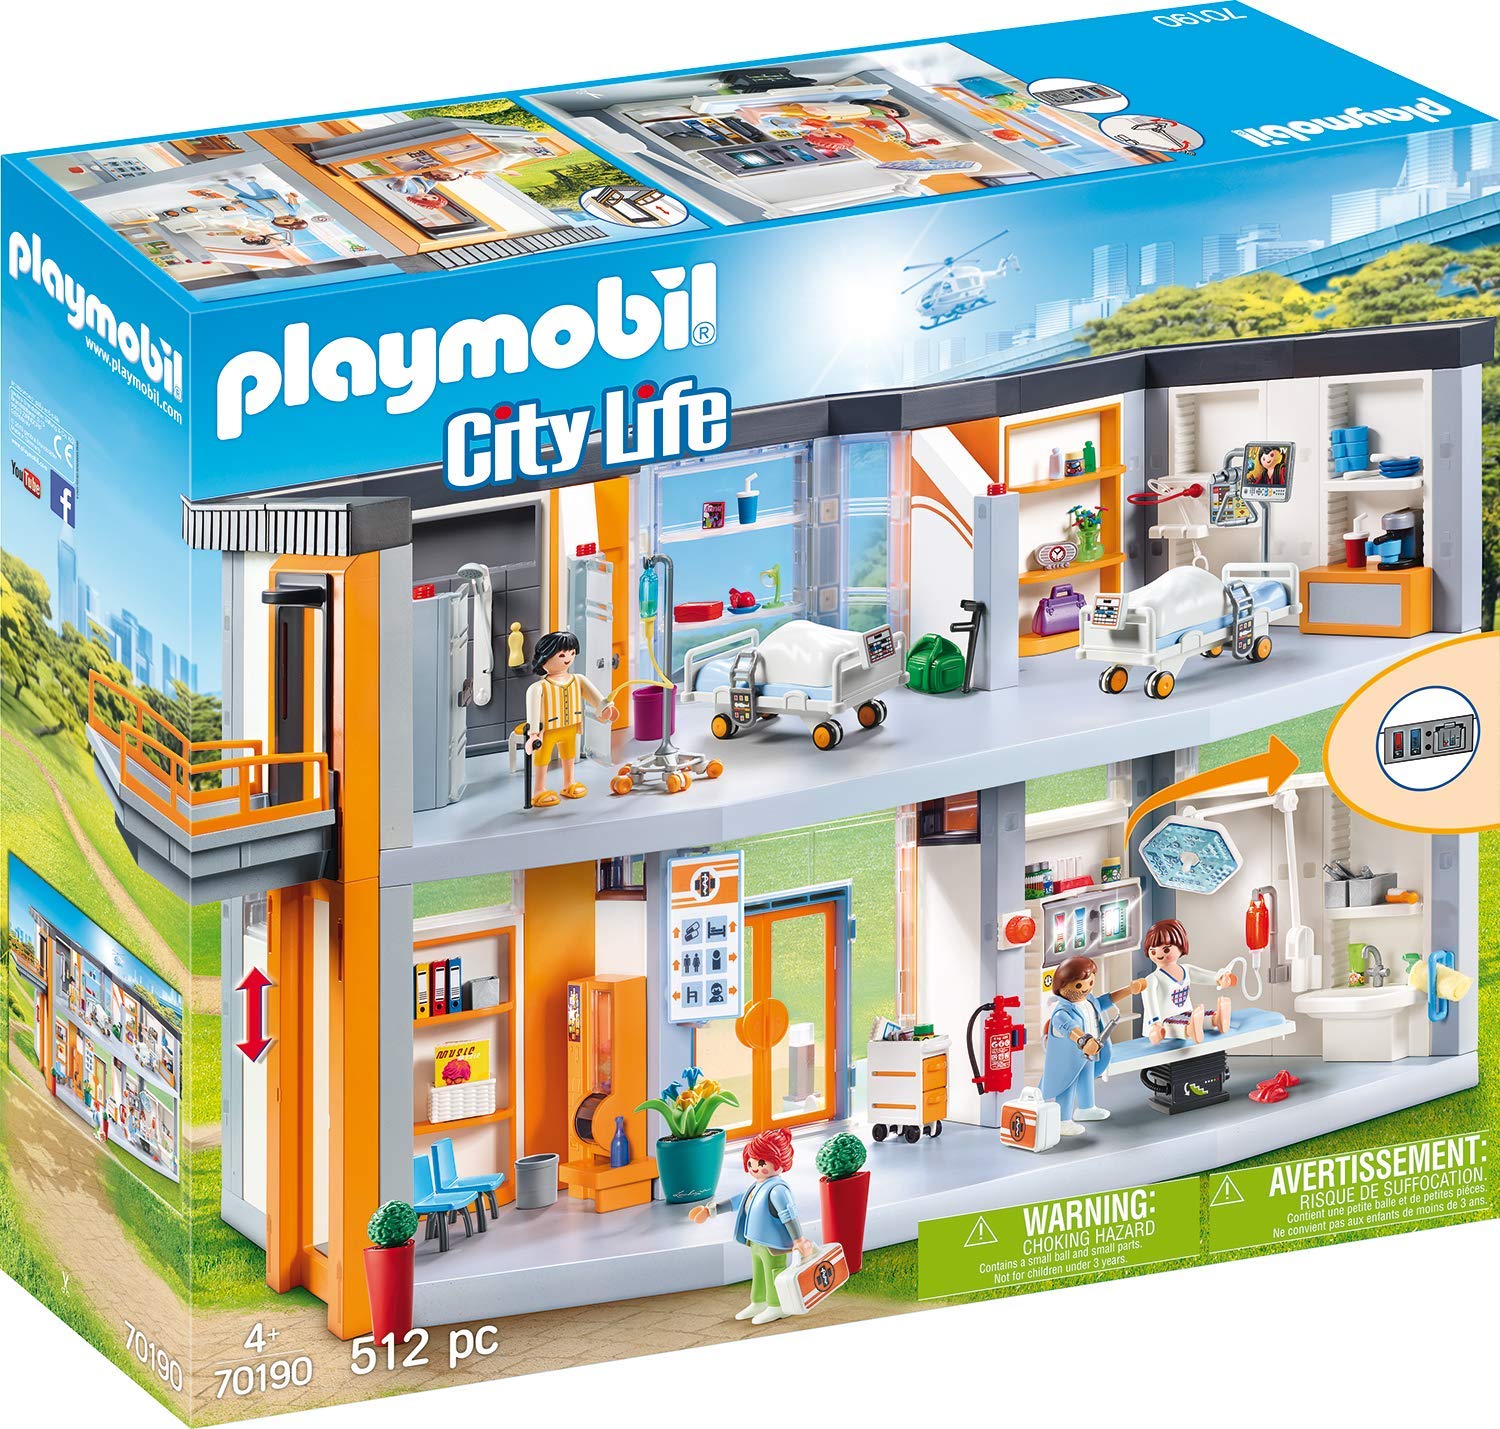 PLAYMOBIL Firce Rescue Gift Set 70291 City Life